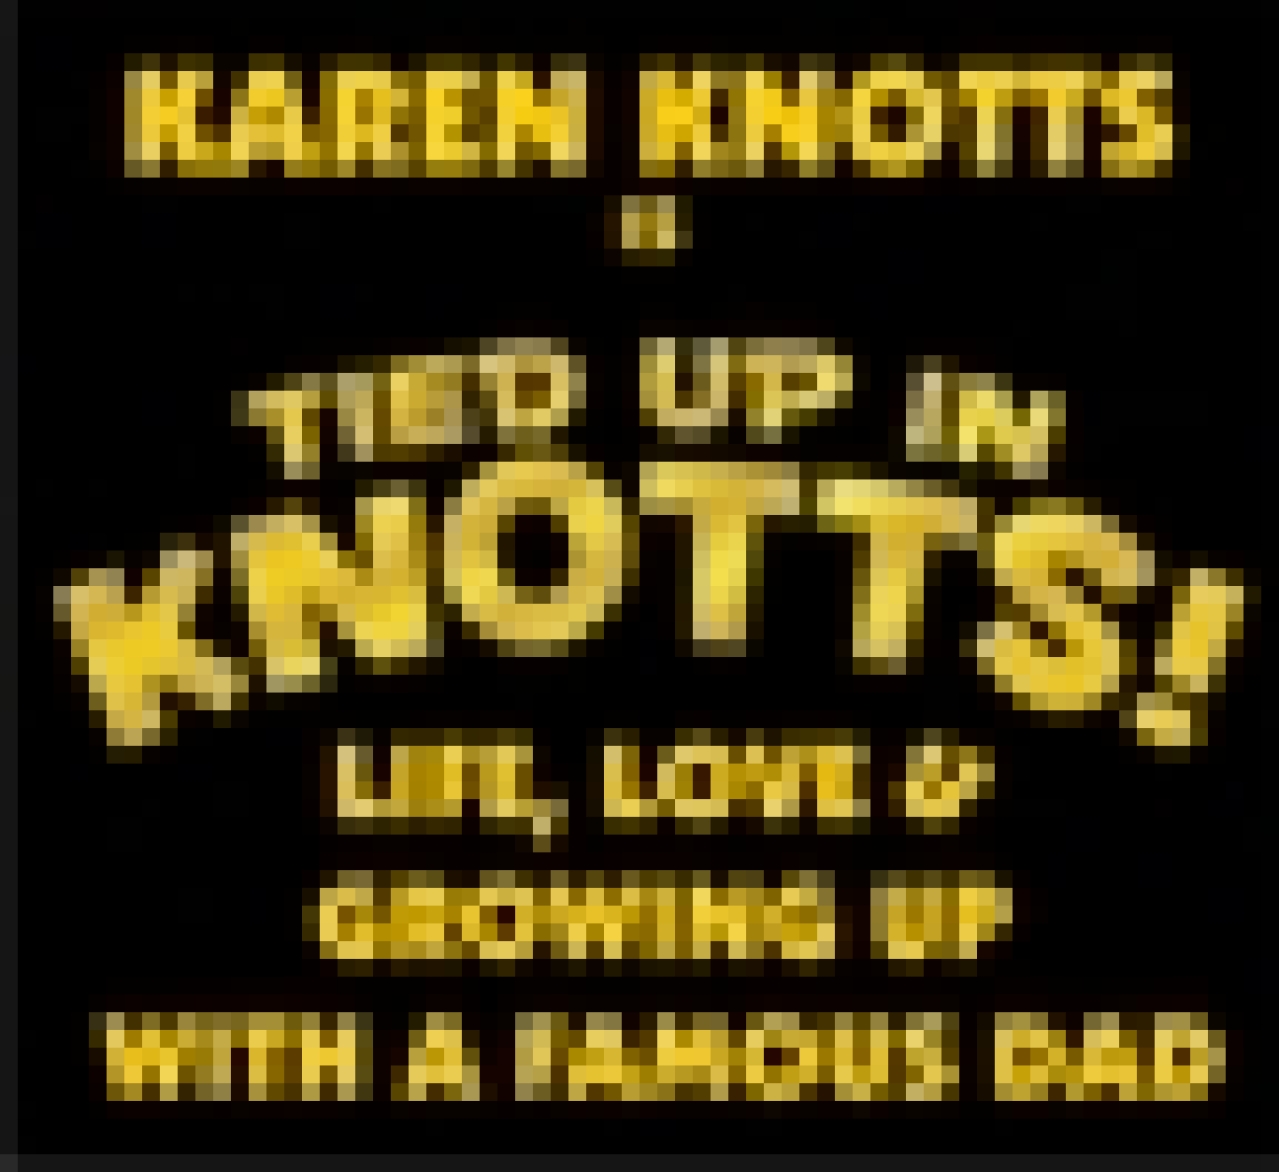 tied up in knotts logo Broadway shows and tickets